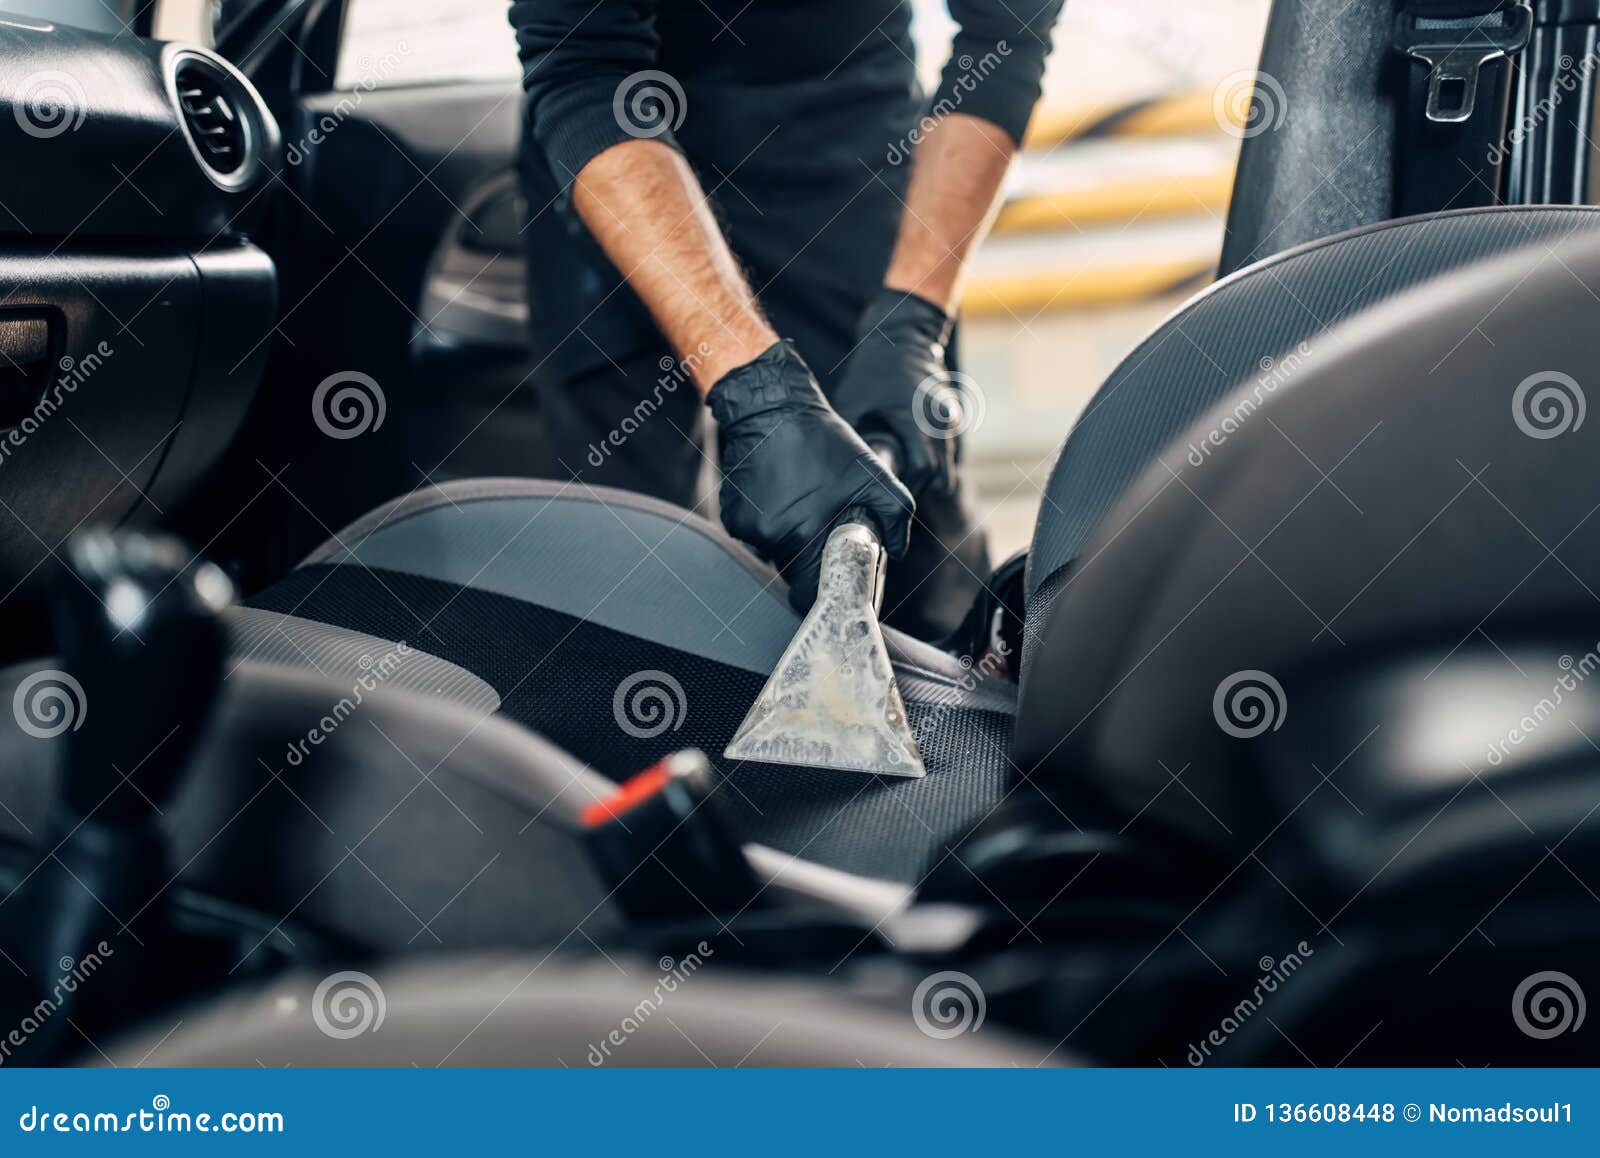 Dry Cleaning Of Car Interior With Vacuum Cleaner Stock Photo